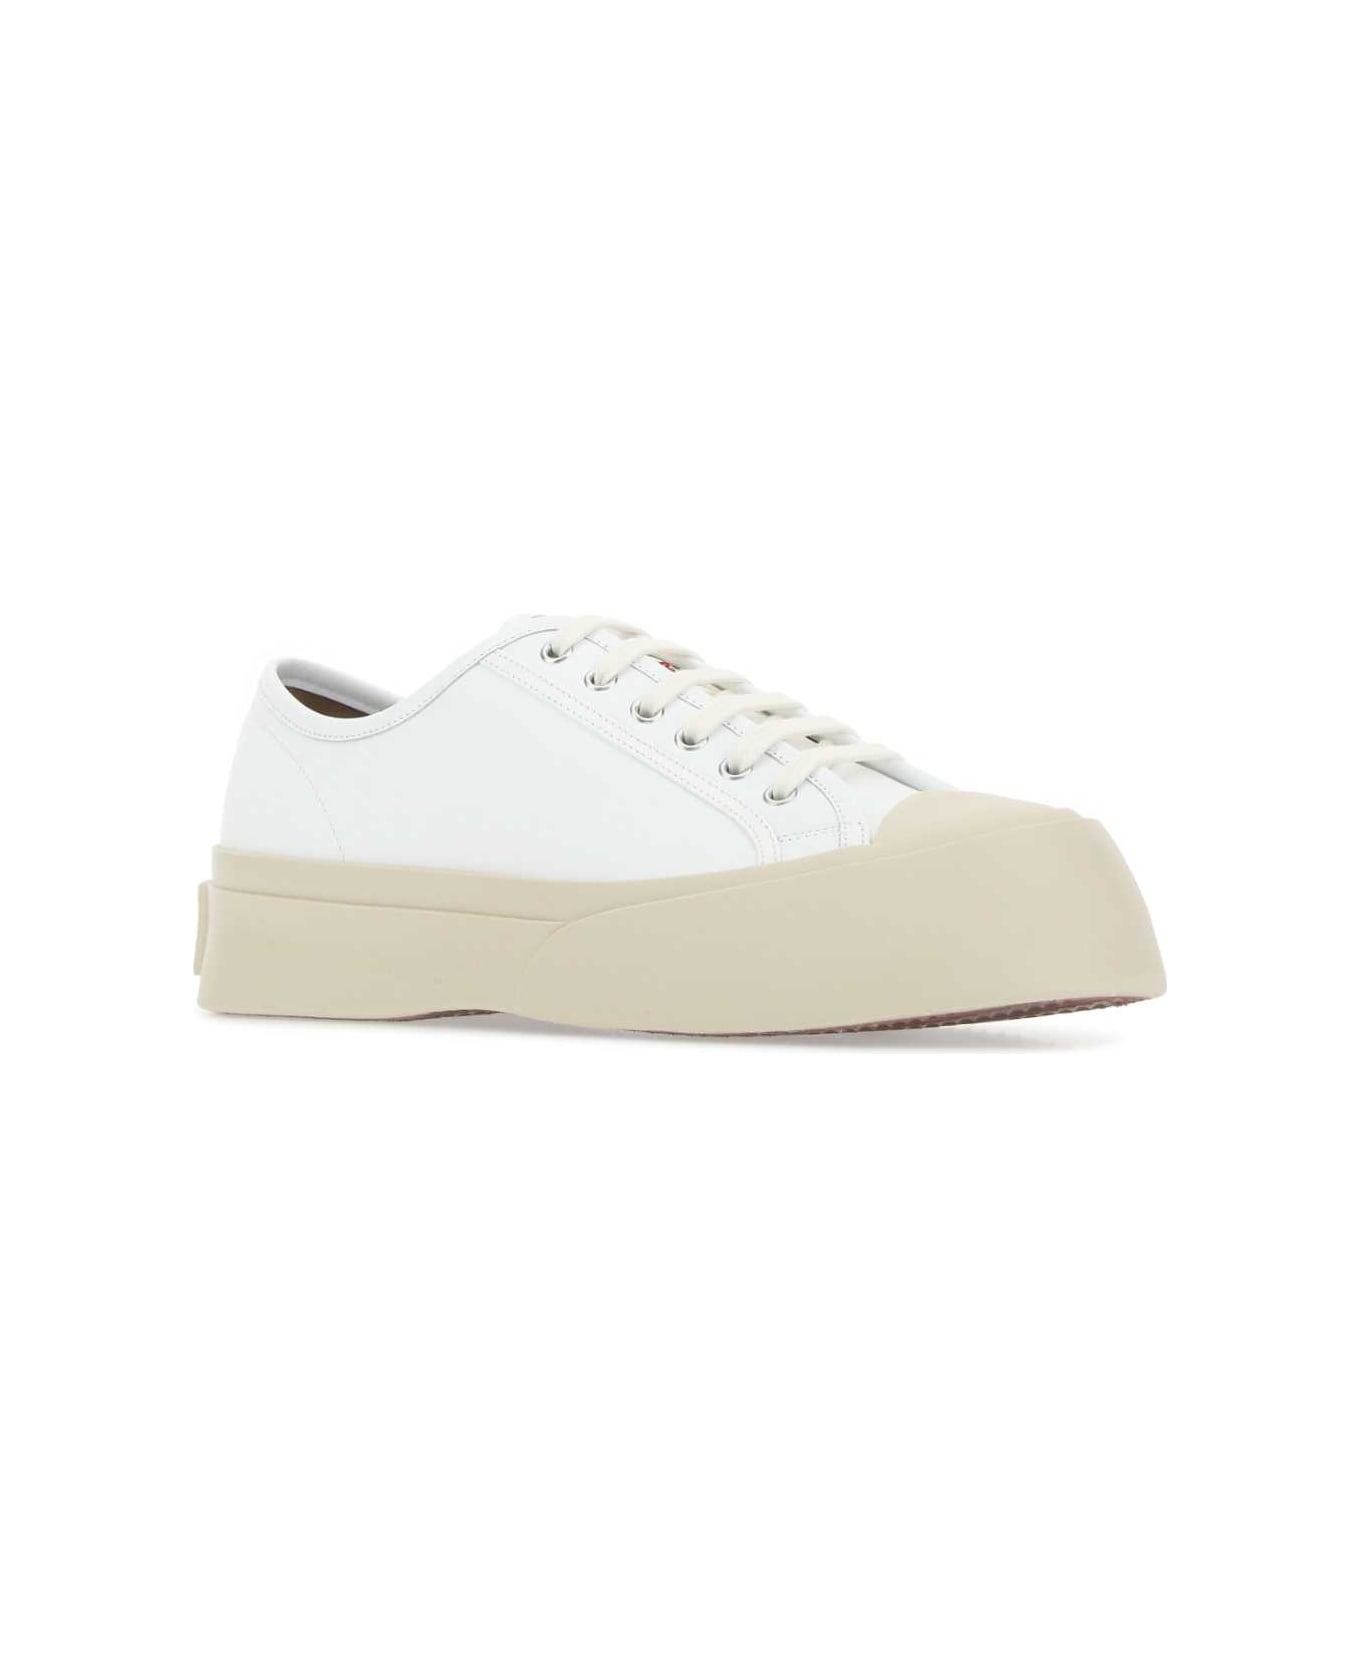 Marni White Leather Pablo Sneakers - 00W01 スニーカー